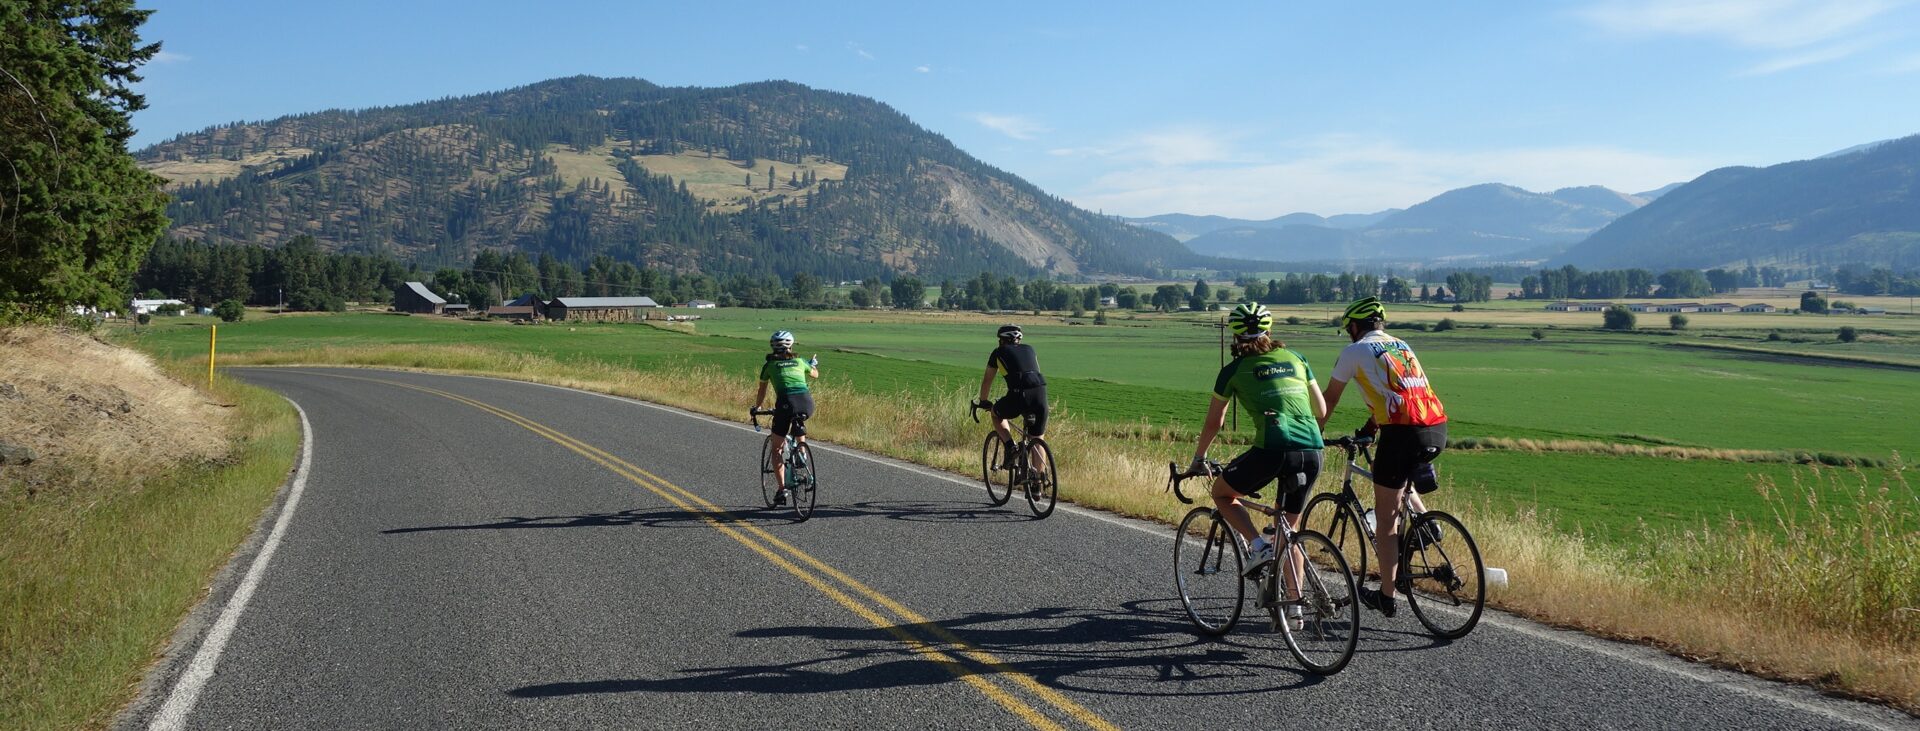 Cyclists riding in Colville, Wash., along a rural road.